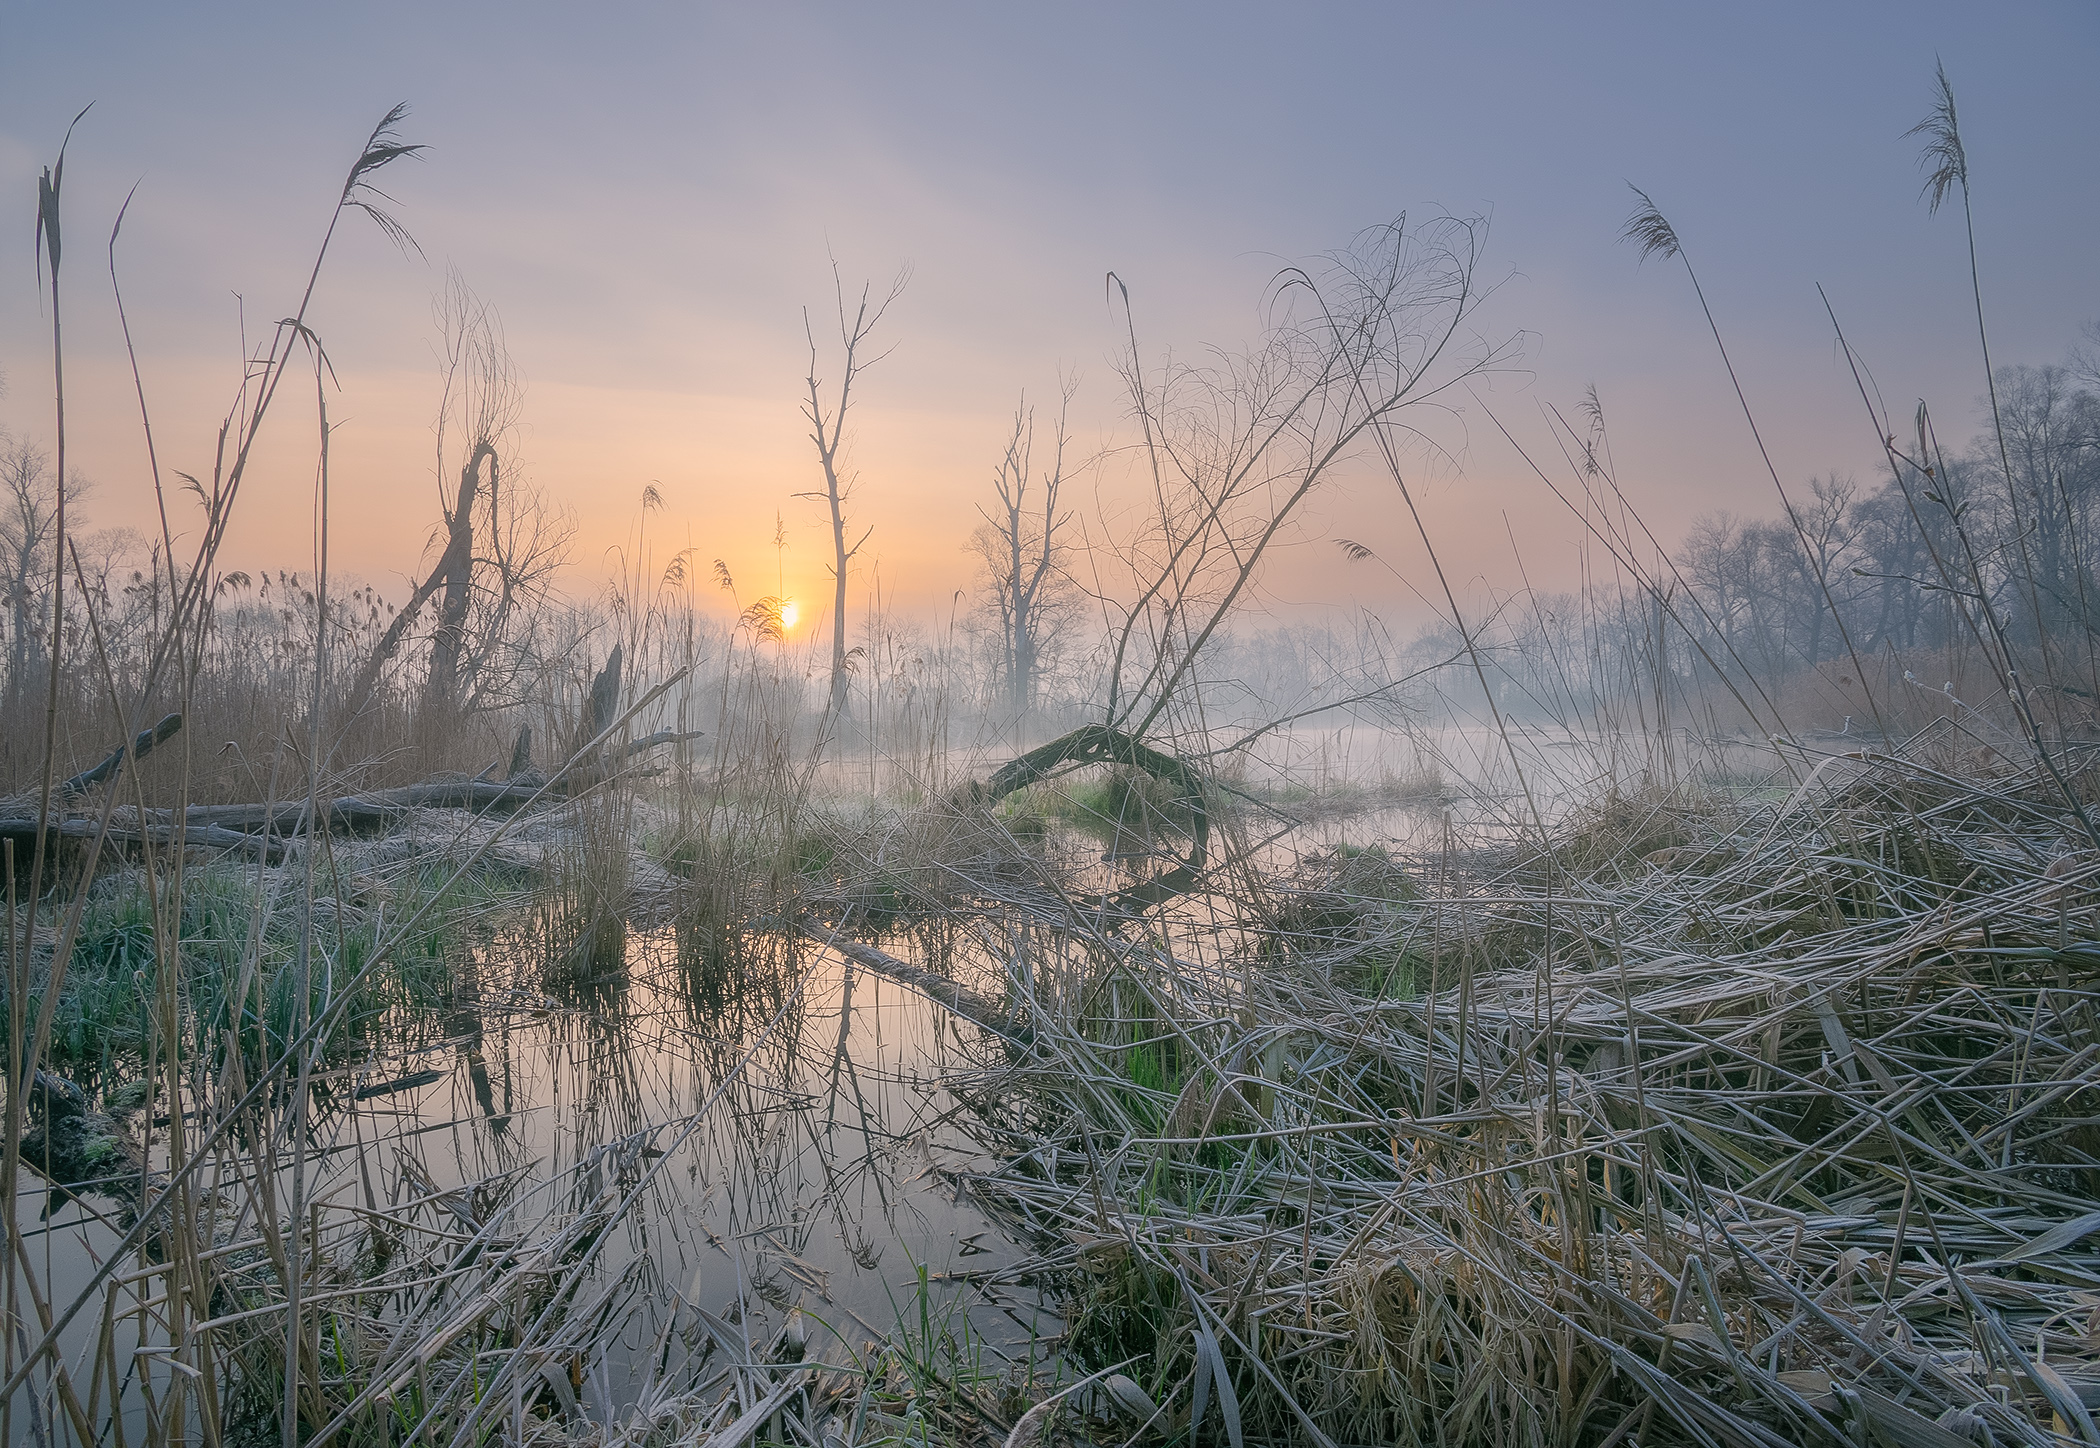 Morning in the Reeds